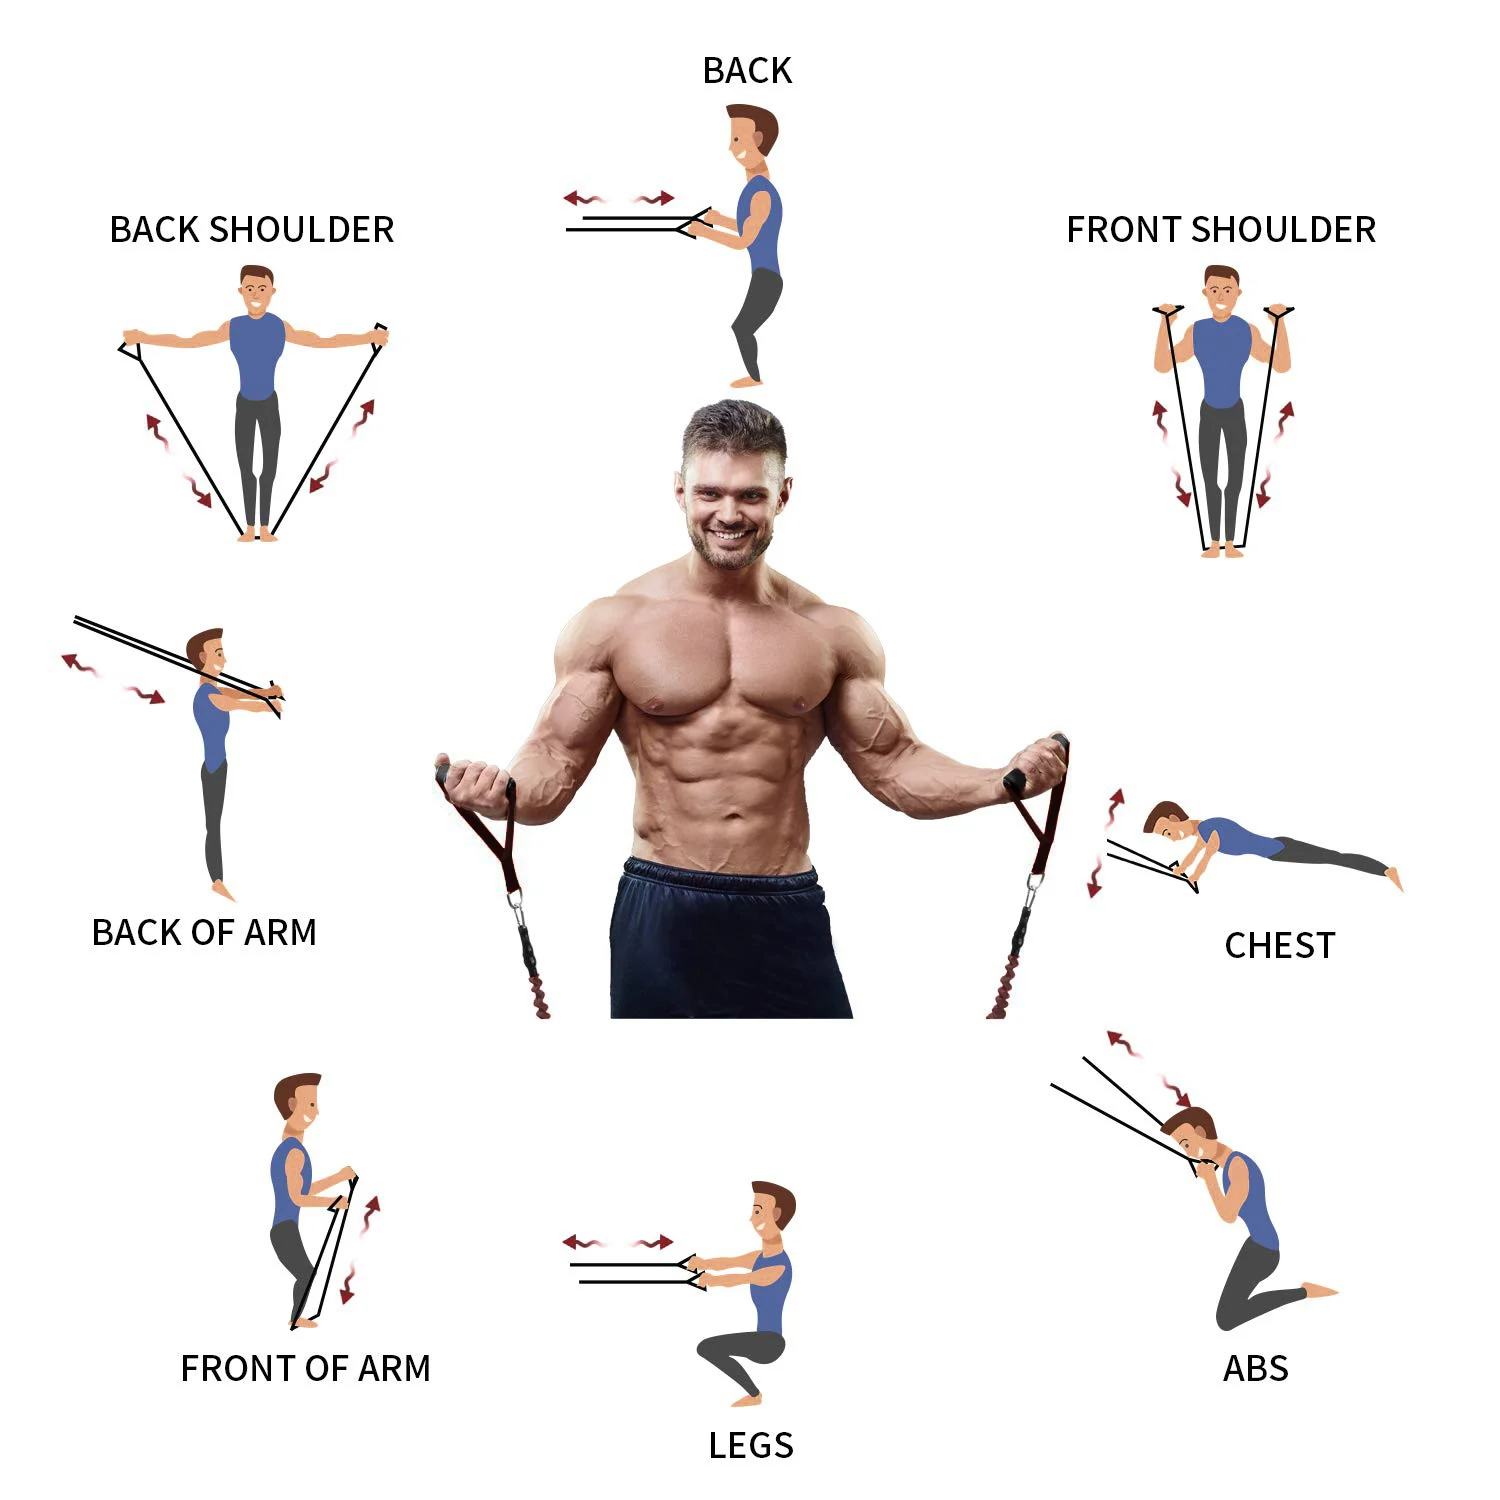 Details about   16 Pcs Resistance Bands Set Workout Bands with Handles for Arms & Legs Training 